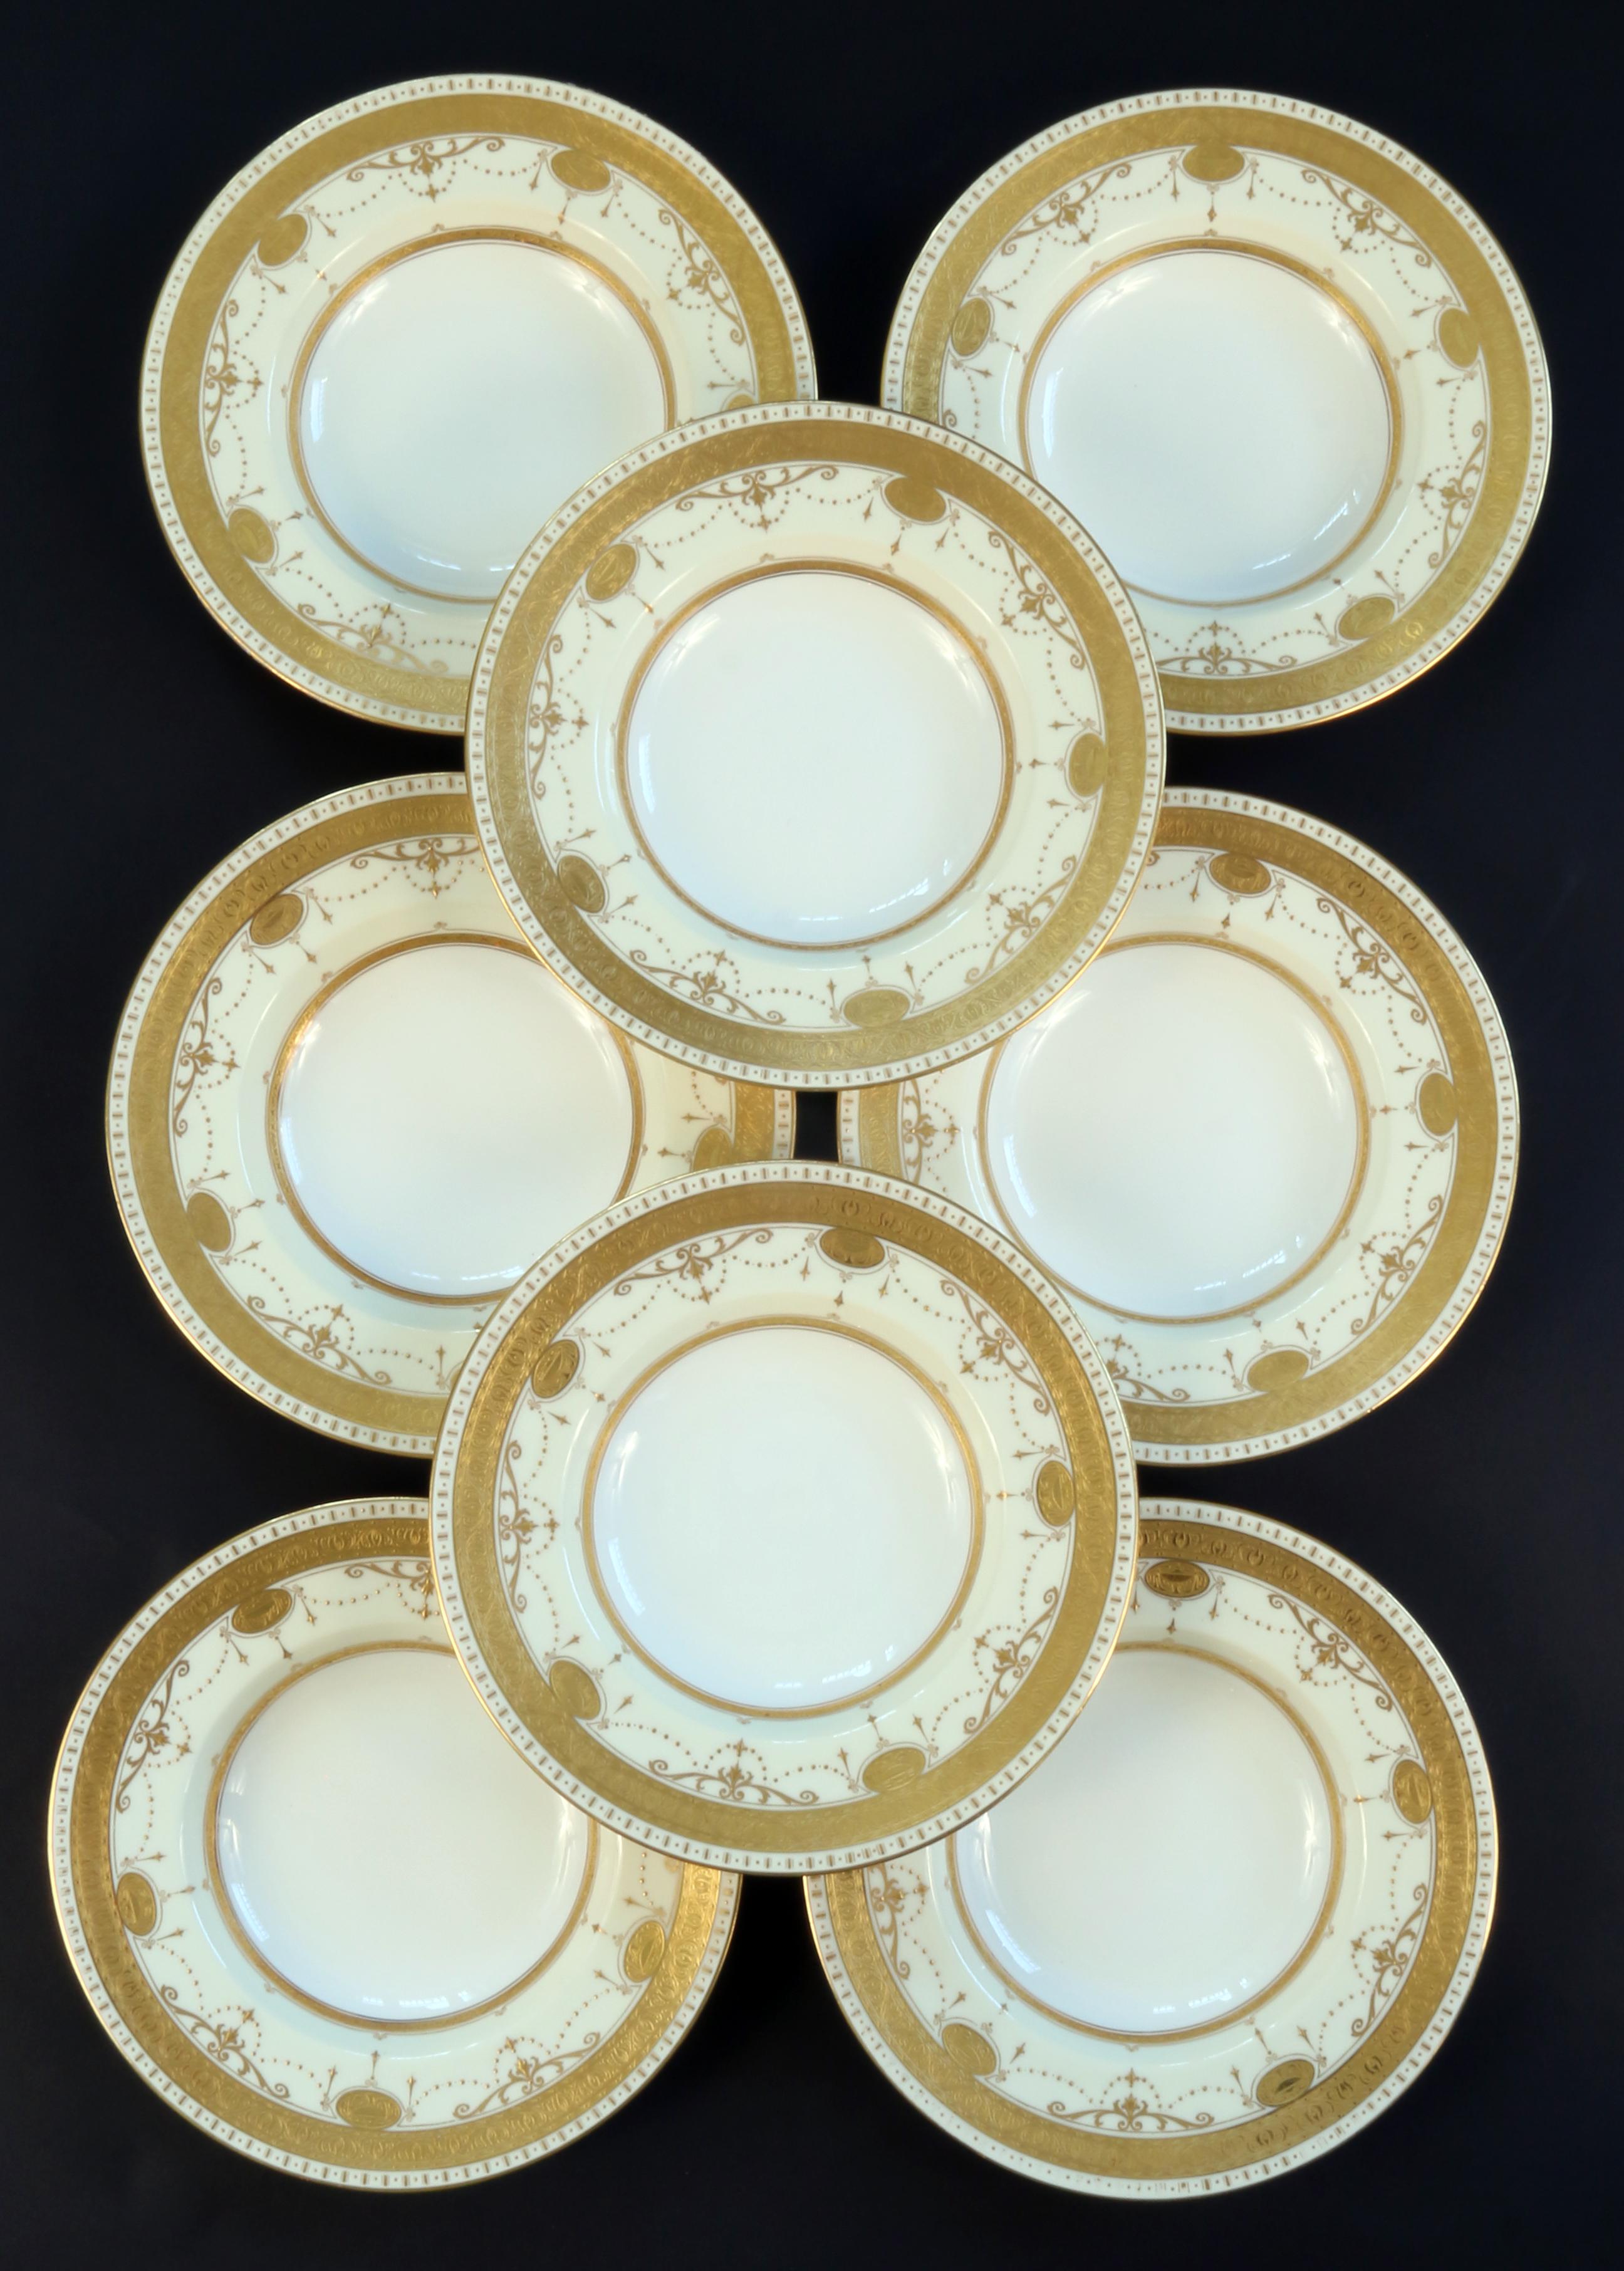 Here is a rare and gorgeous 22-karat gold on ivory-ground complete service for 8 from Minton, stoke-on Trent, England. The set includes dinner, soup and salad/dessert plates. Extra pieces include 3 dinner plates and 1 salad plate for 28 pieces